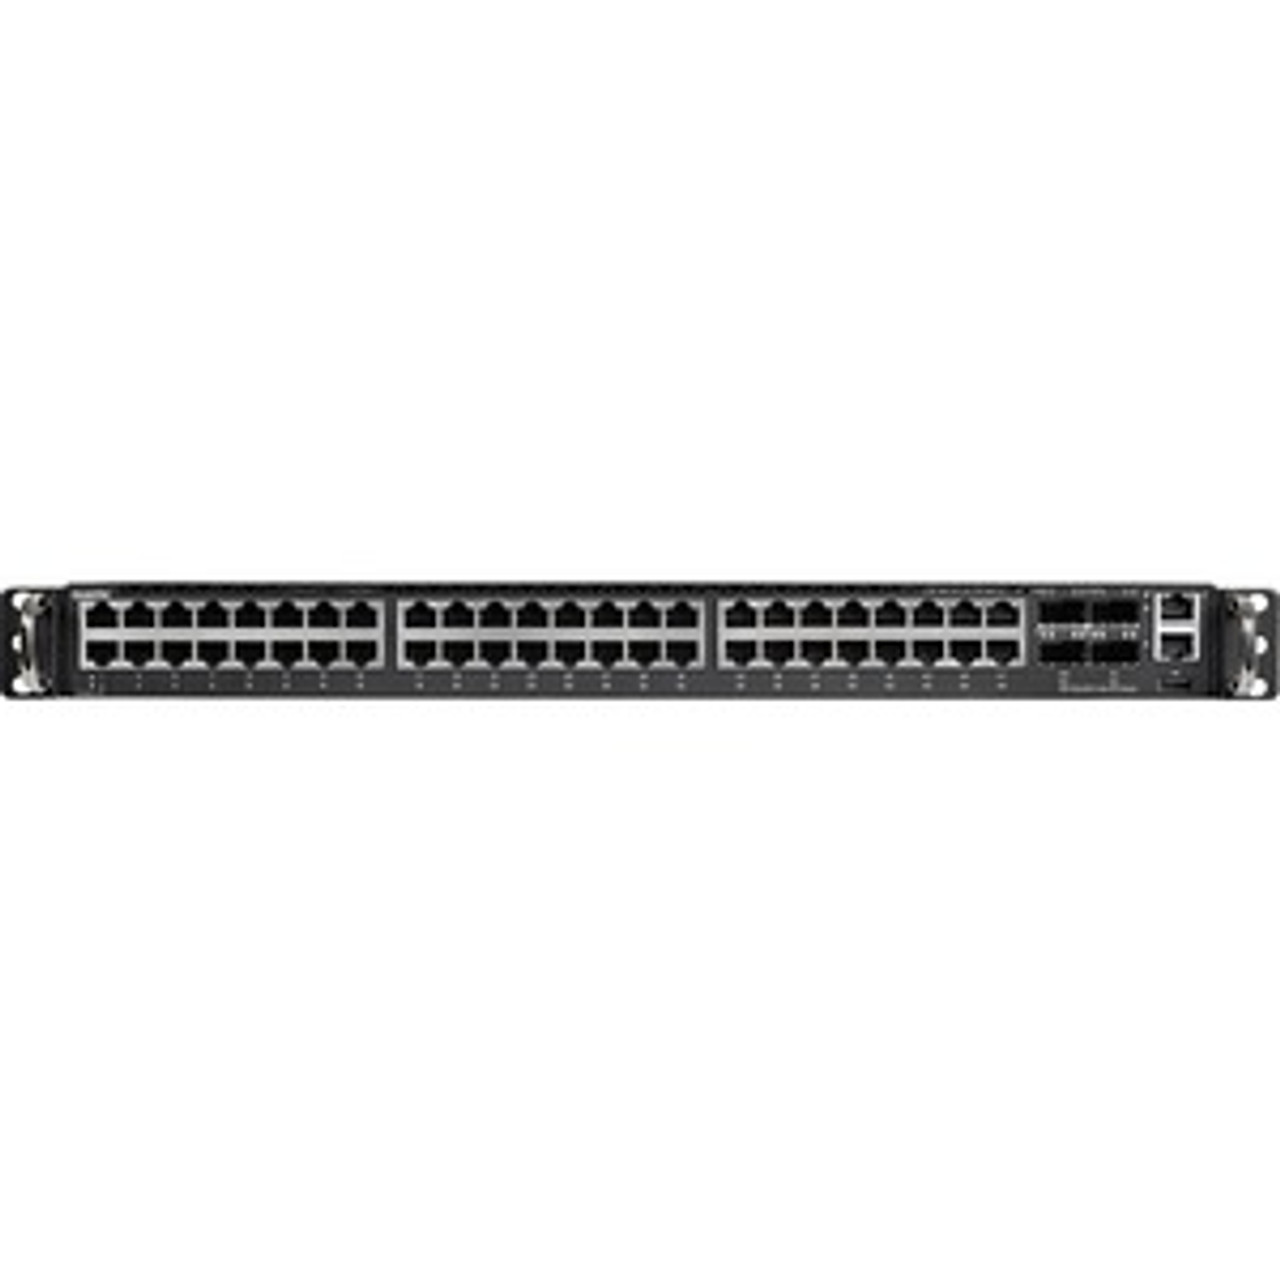 1LY9BZZ0ST7 QCT A Powerful Spine/Leaf Switch for Datacenter and Cloud Computing - 48 Ports - Manageable - 10GBase-T - 4 Layer Supported - Modular - Optical